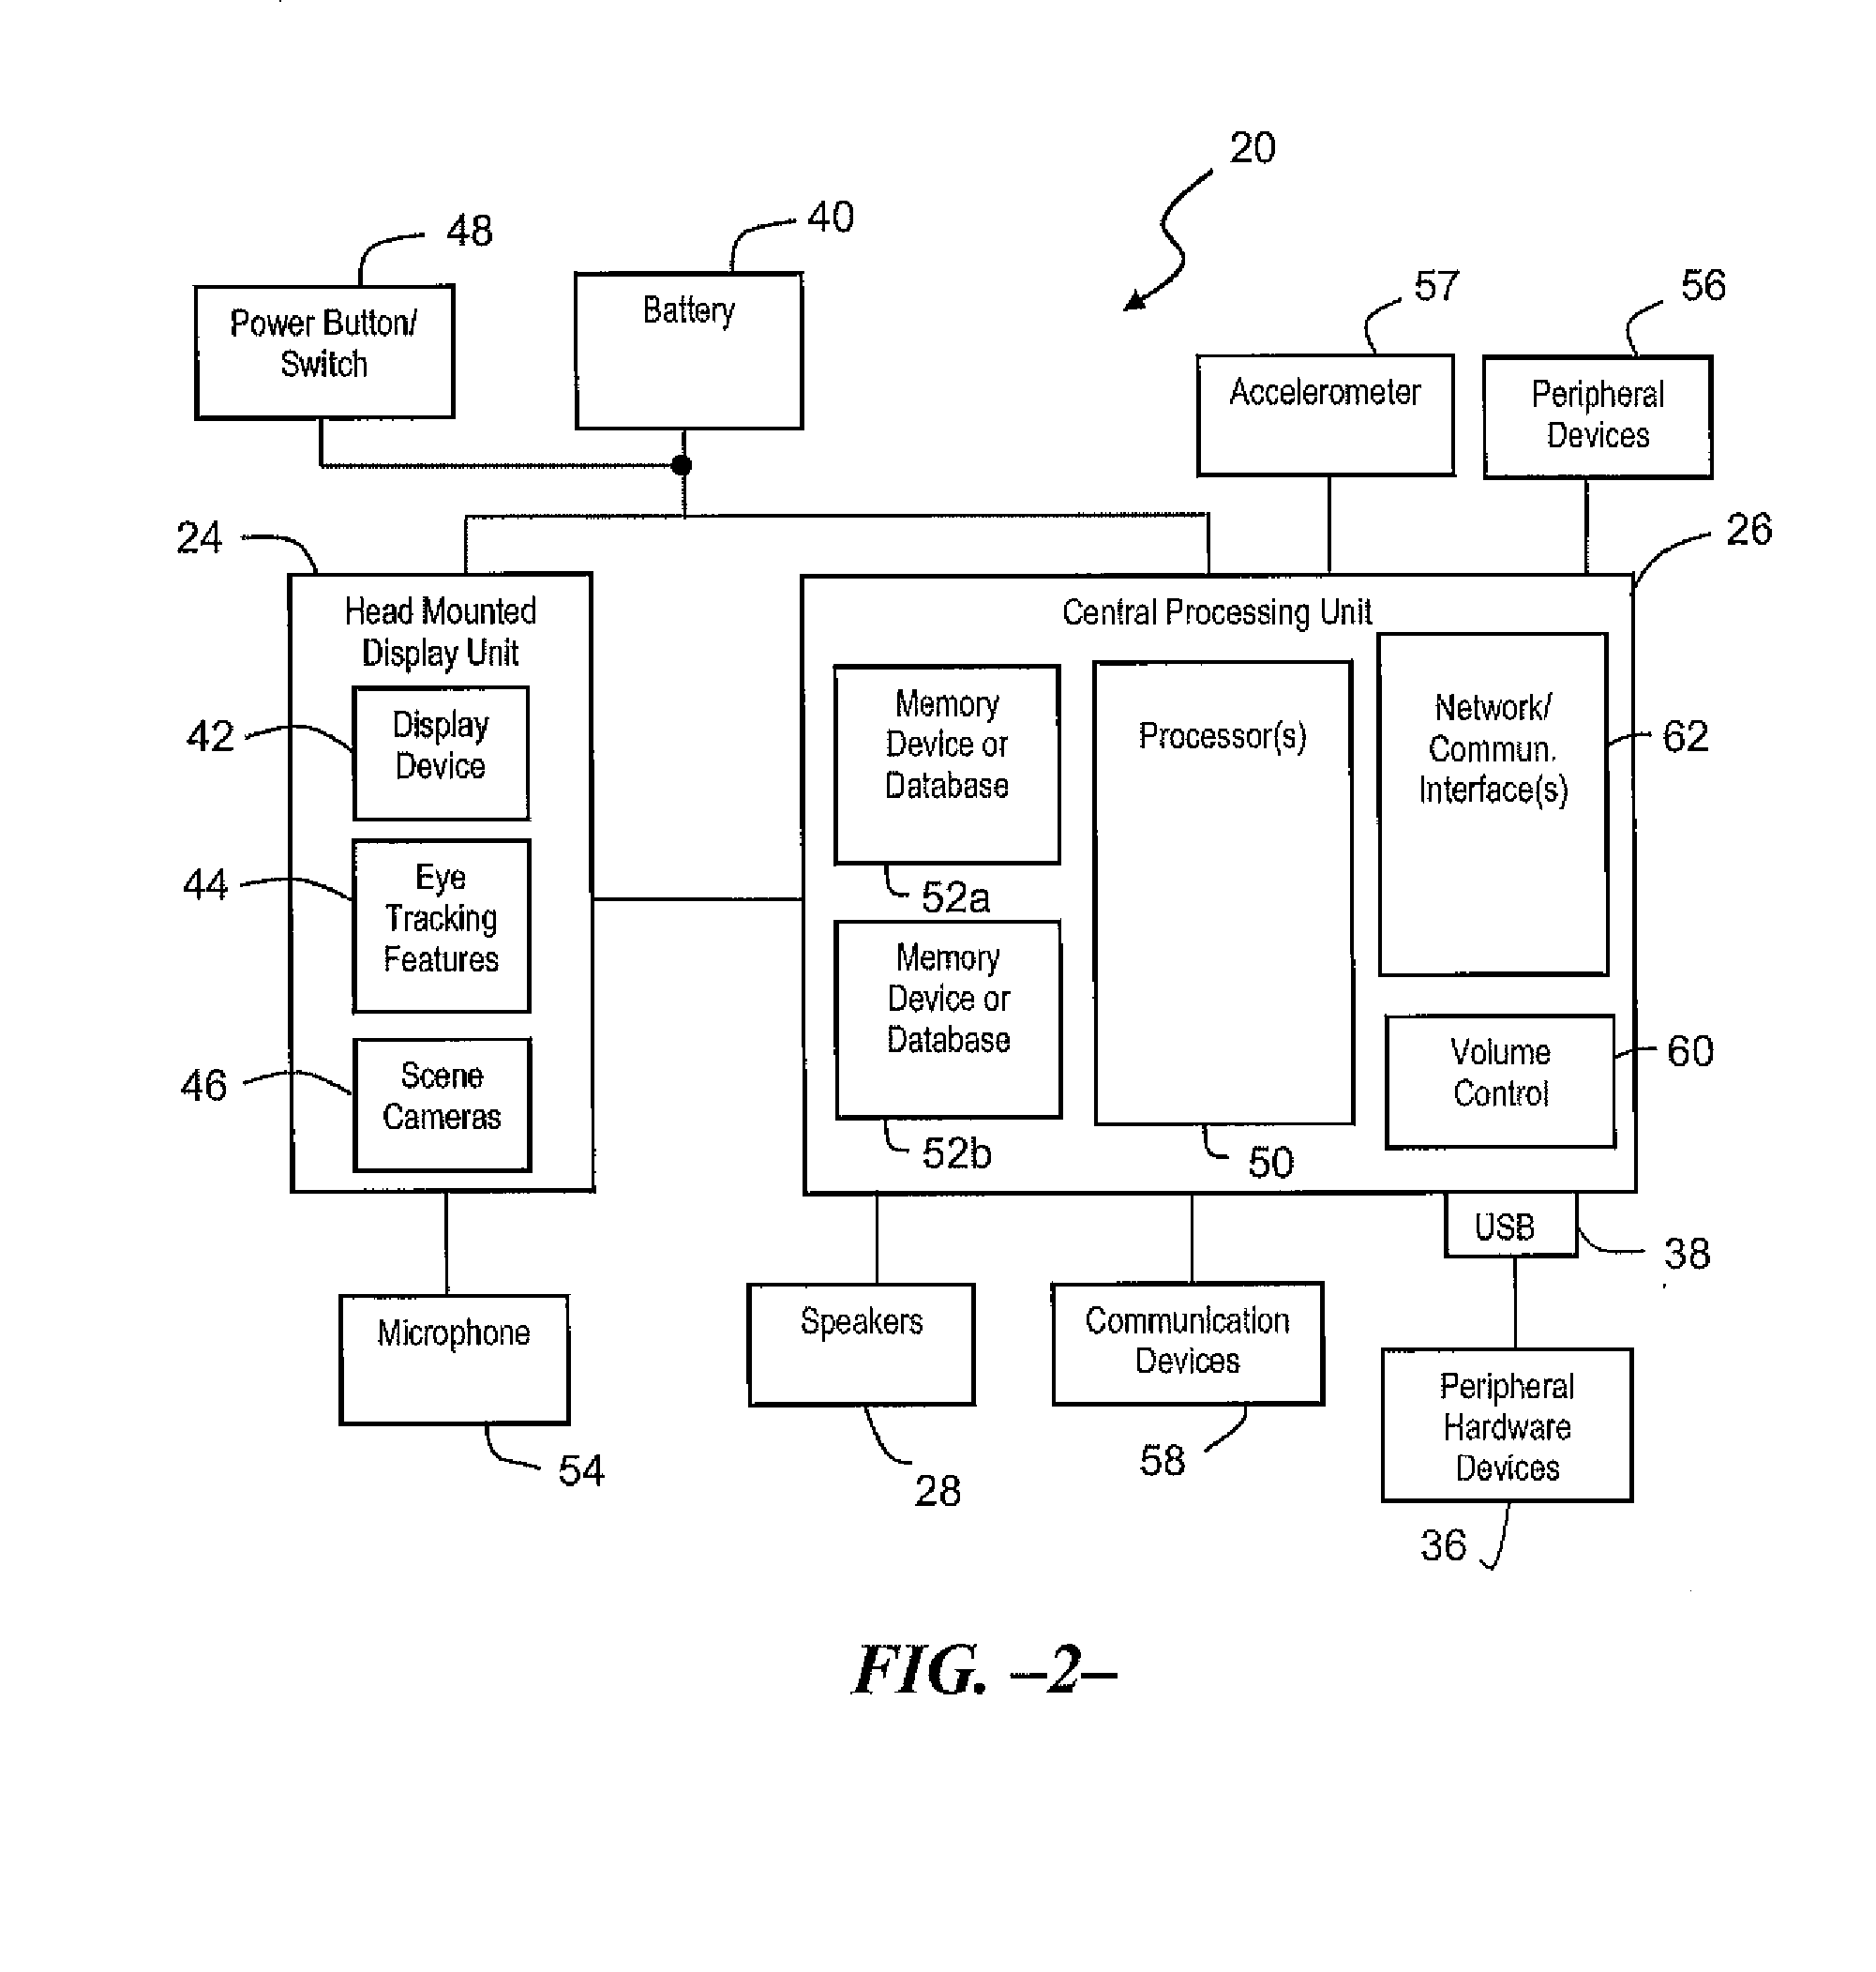 Speech generation device with a head mounted display unit